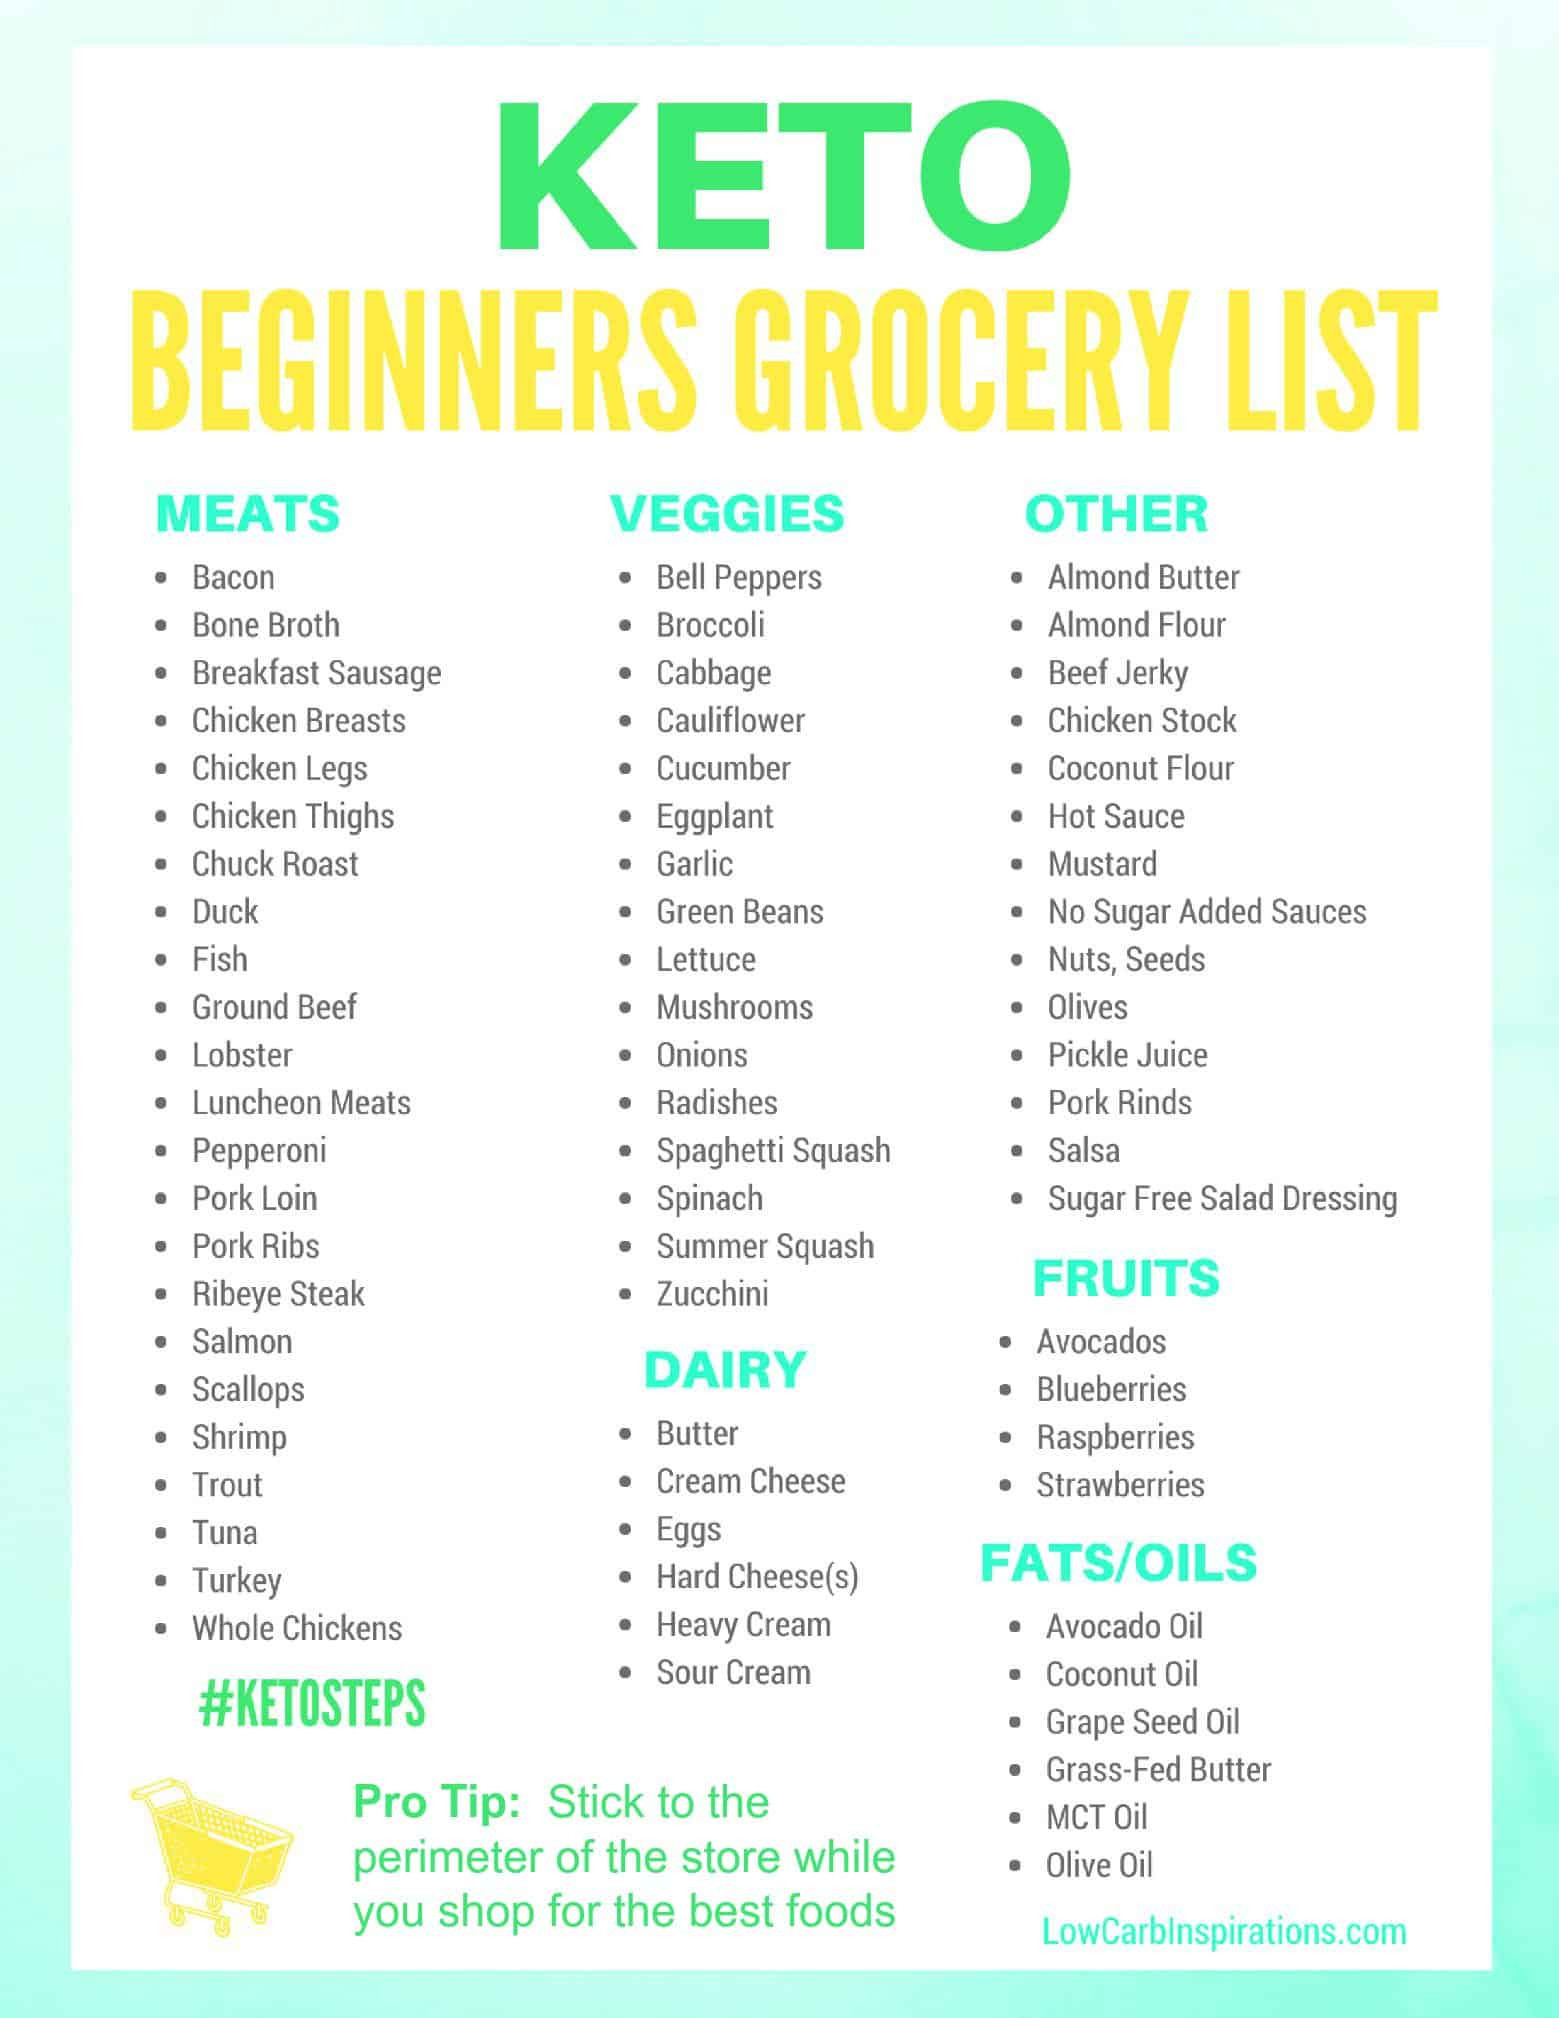 Keto Diet For Beginners Keto Diet For Beginners Meal Plan With Grocery List
 Keto Grocery List for Beginners iSaveA2Z